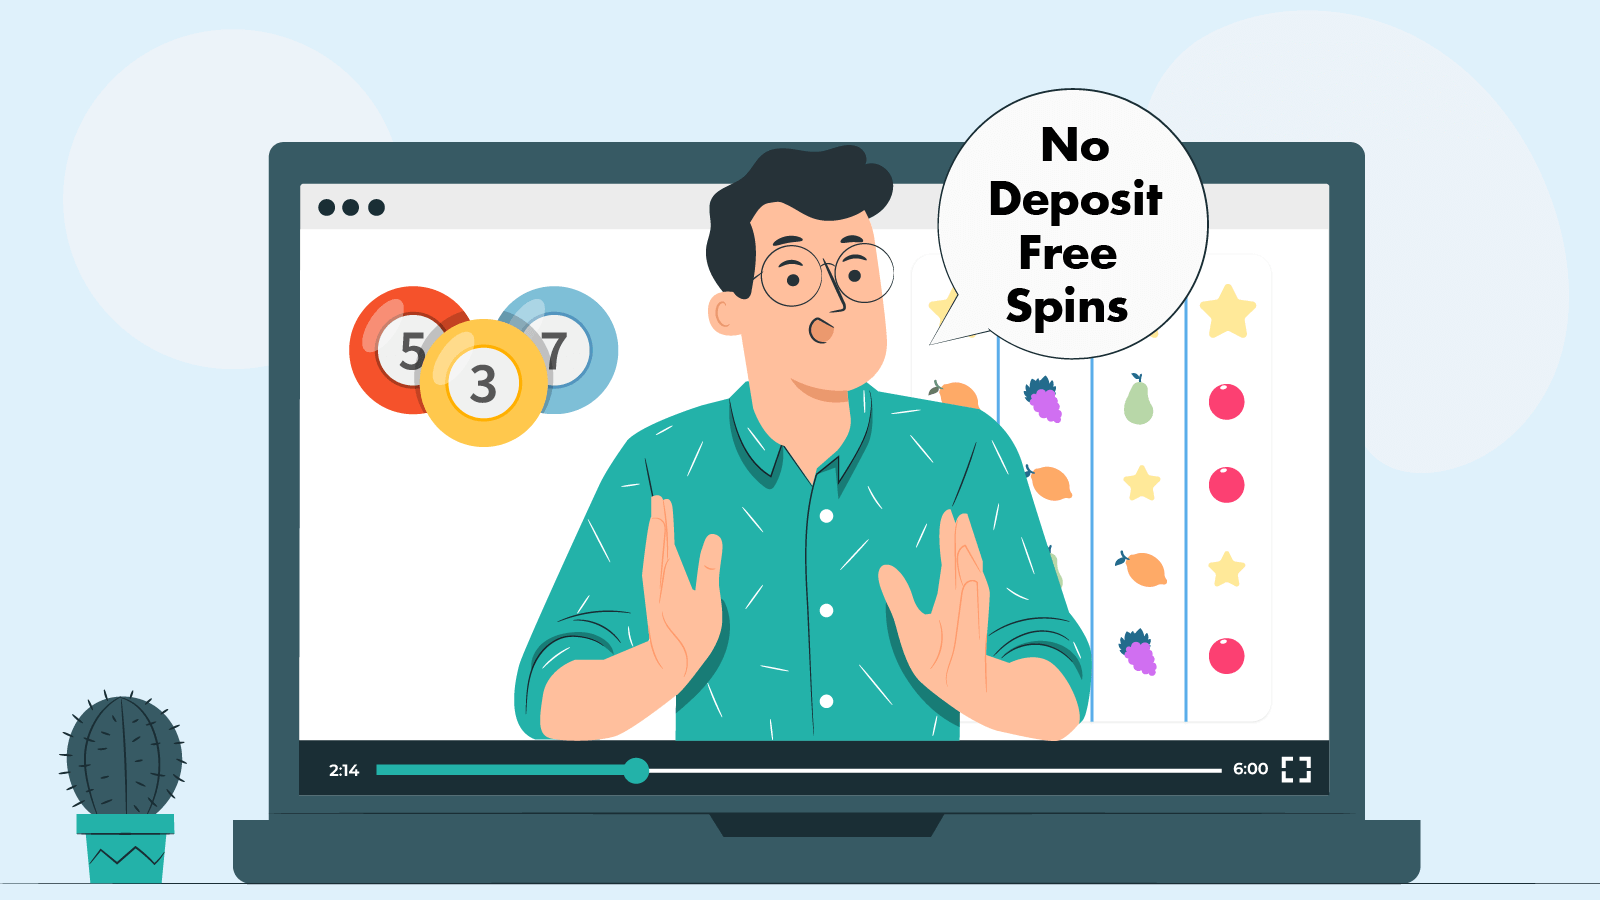 Discover all about free spins with no deposit